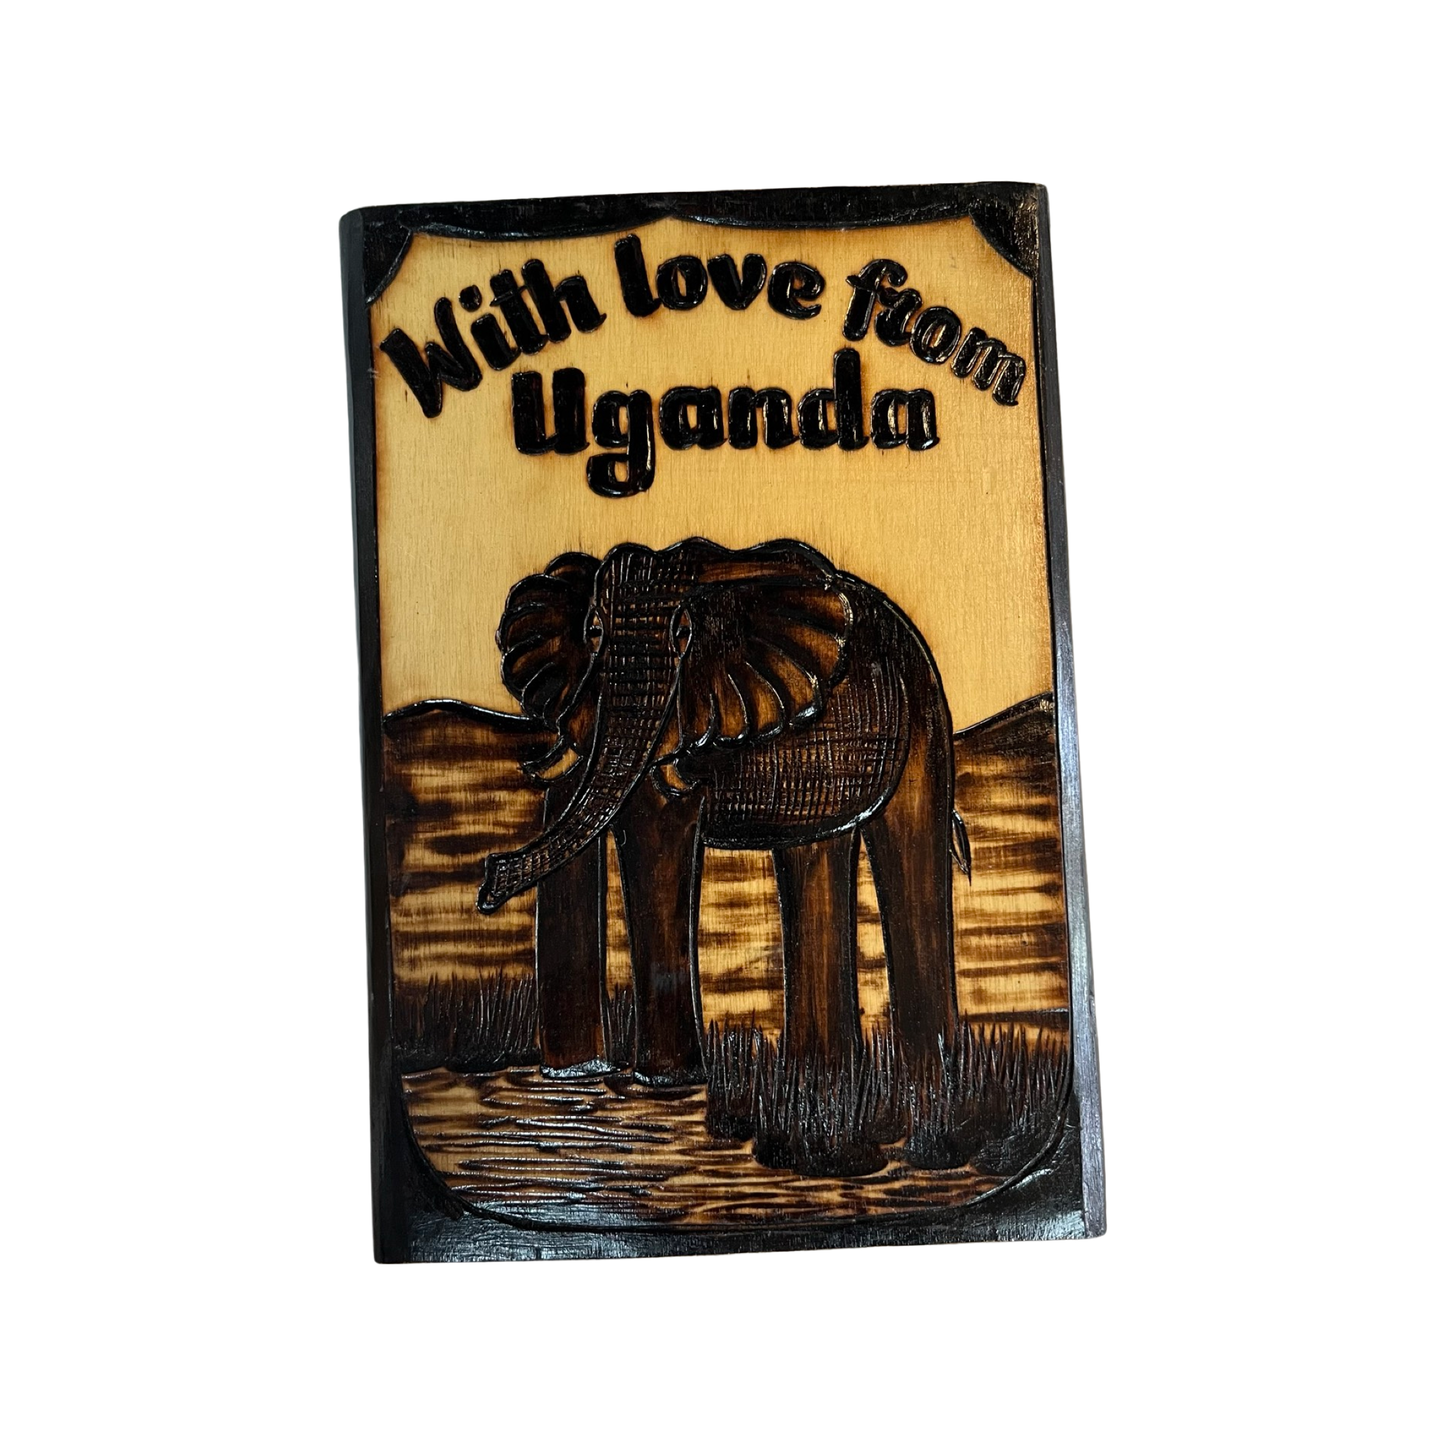 With Love from Uganda wooden Art